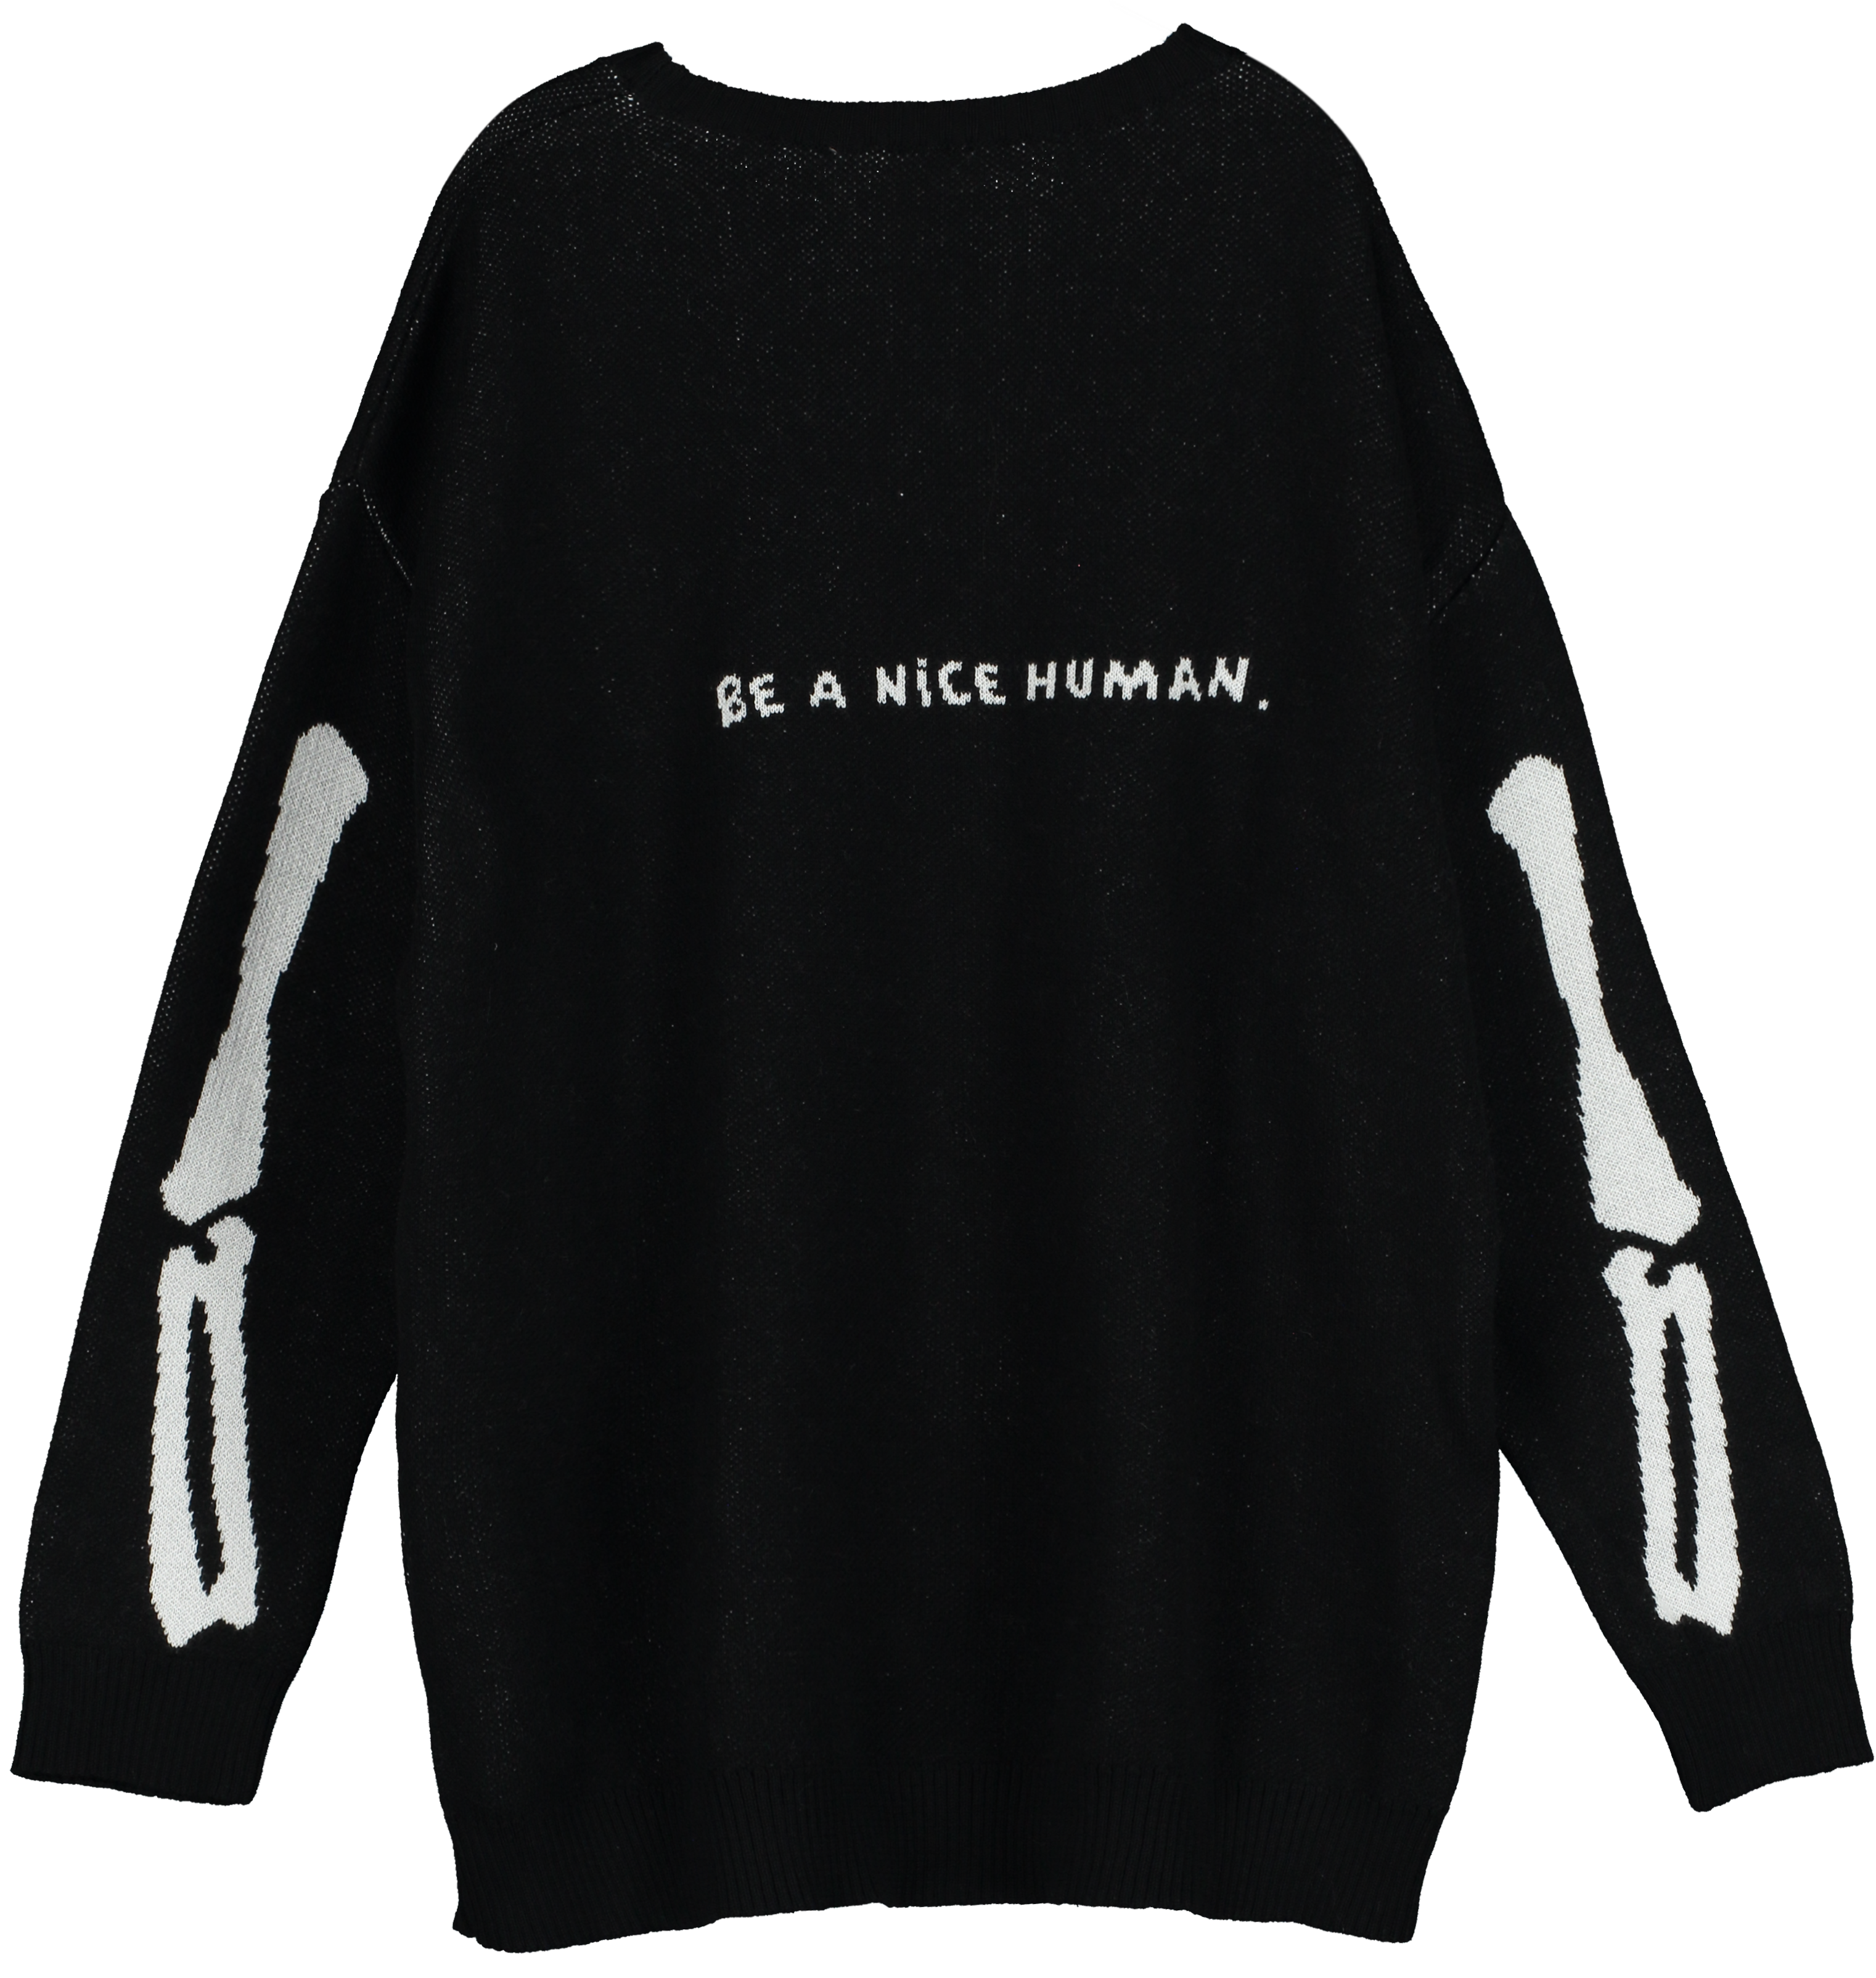                                                                                                                       Knit Tracked Suit Sweater - Skeleton